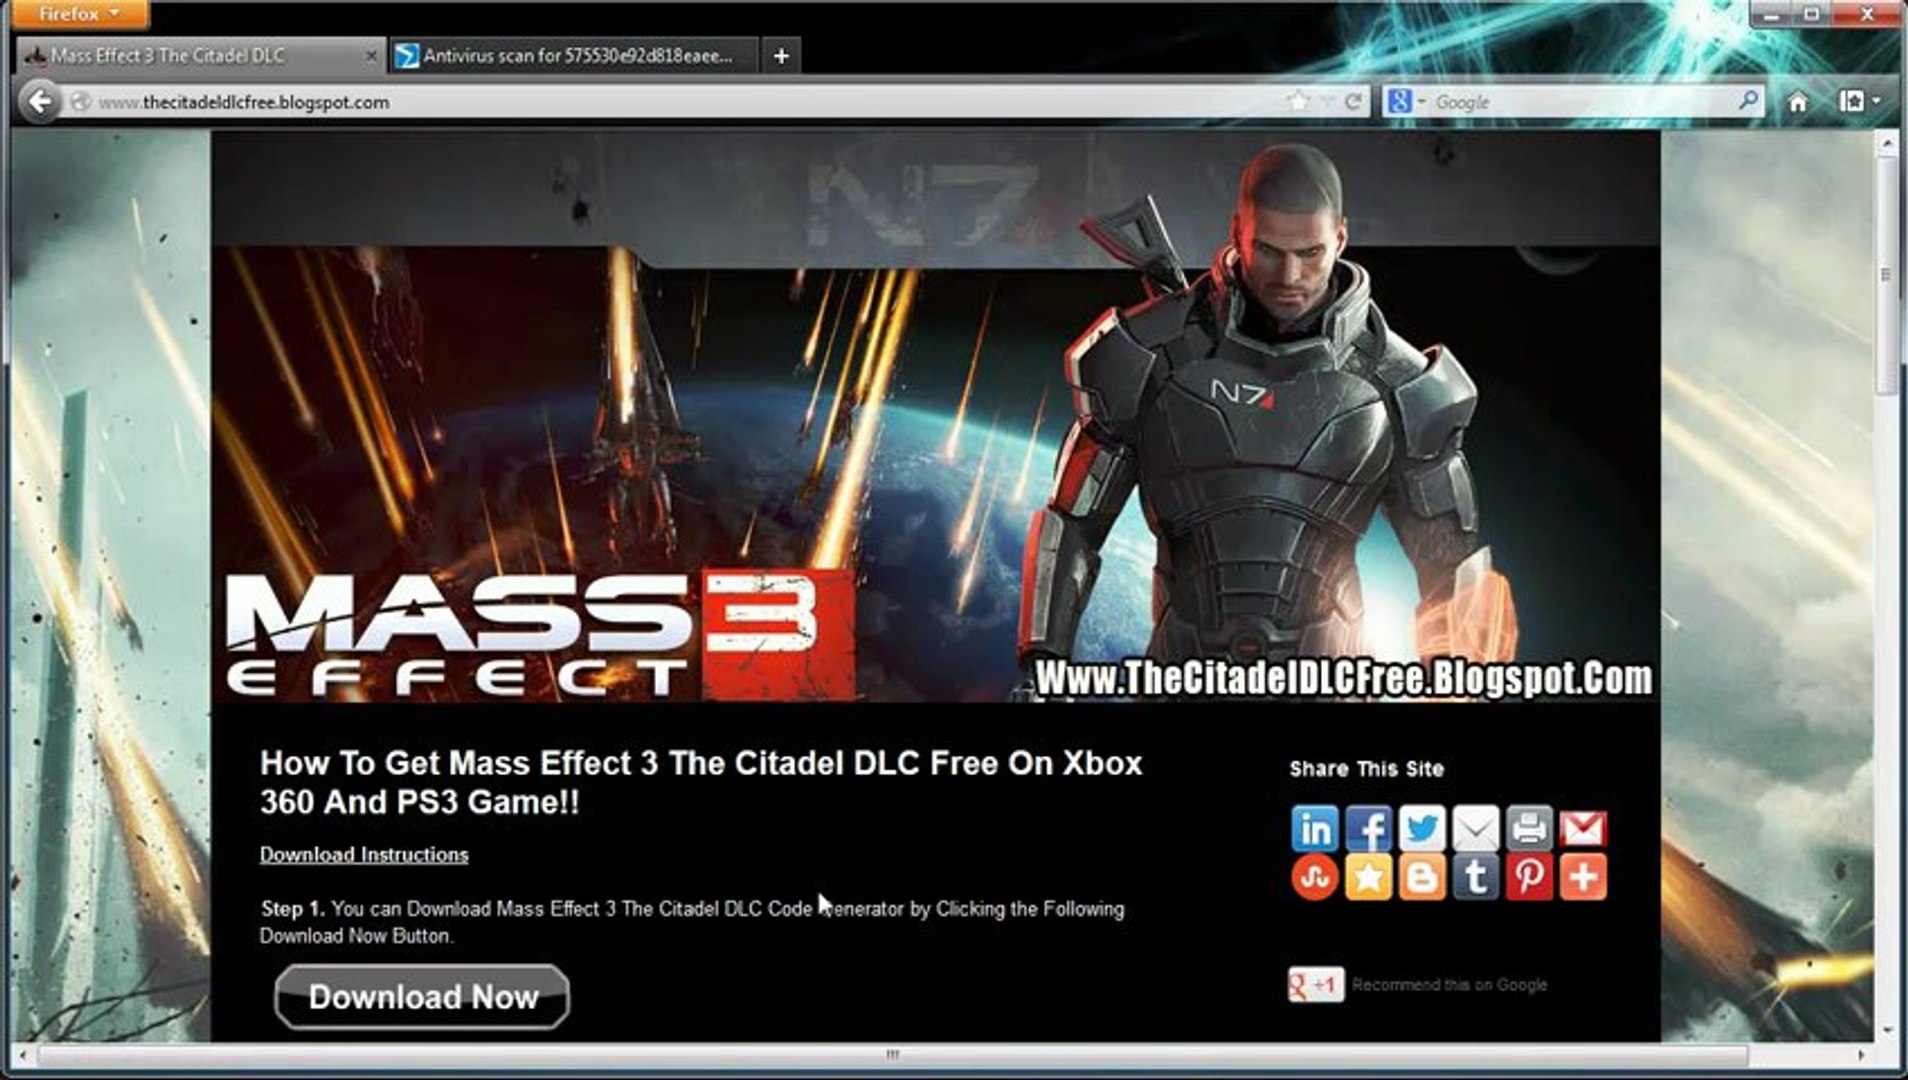 Get Free Mass Effect 3 The Citadel DLC - Xbox 360 - PS3 - video Dailymotion